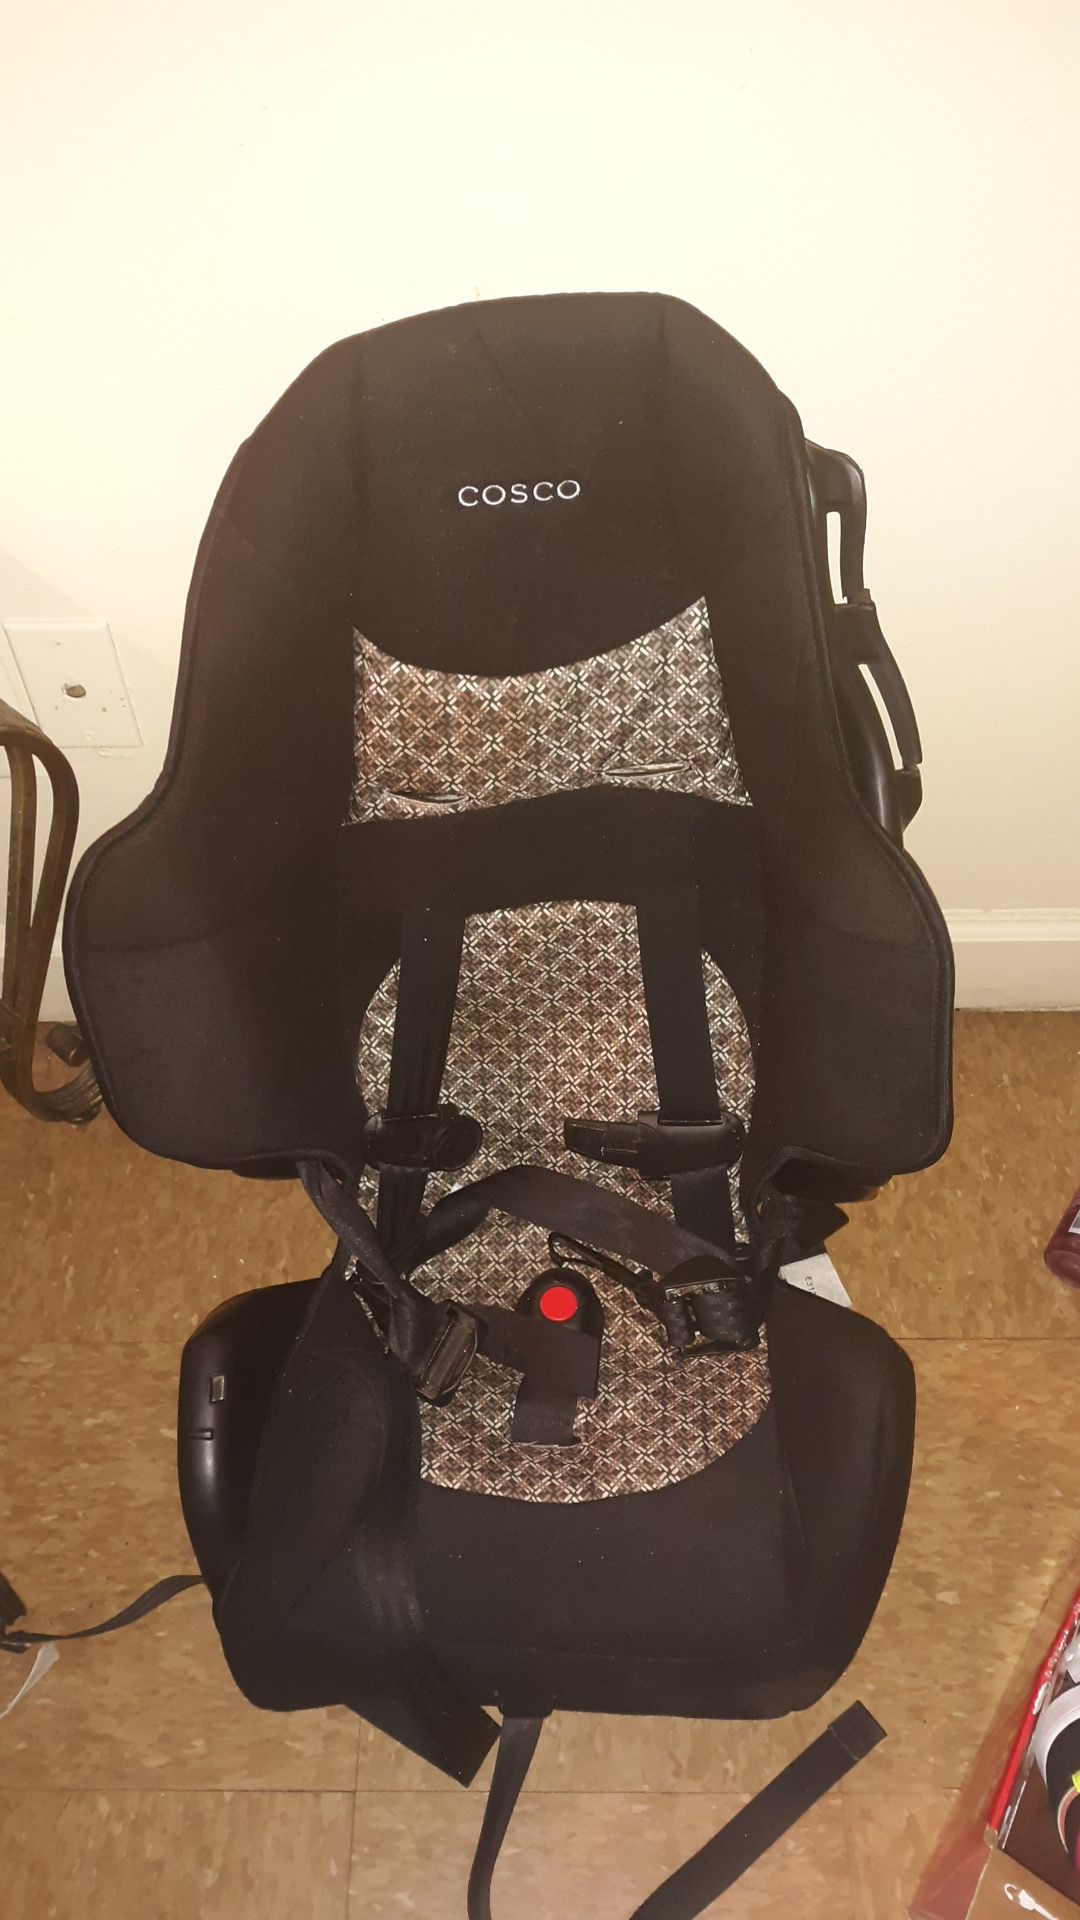 Booster seat still in good condition